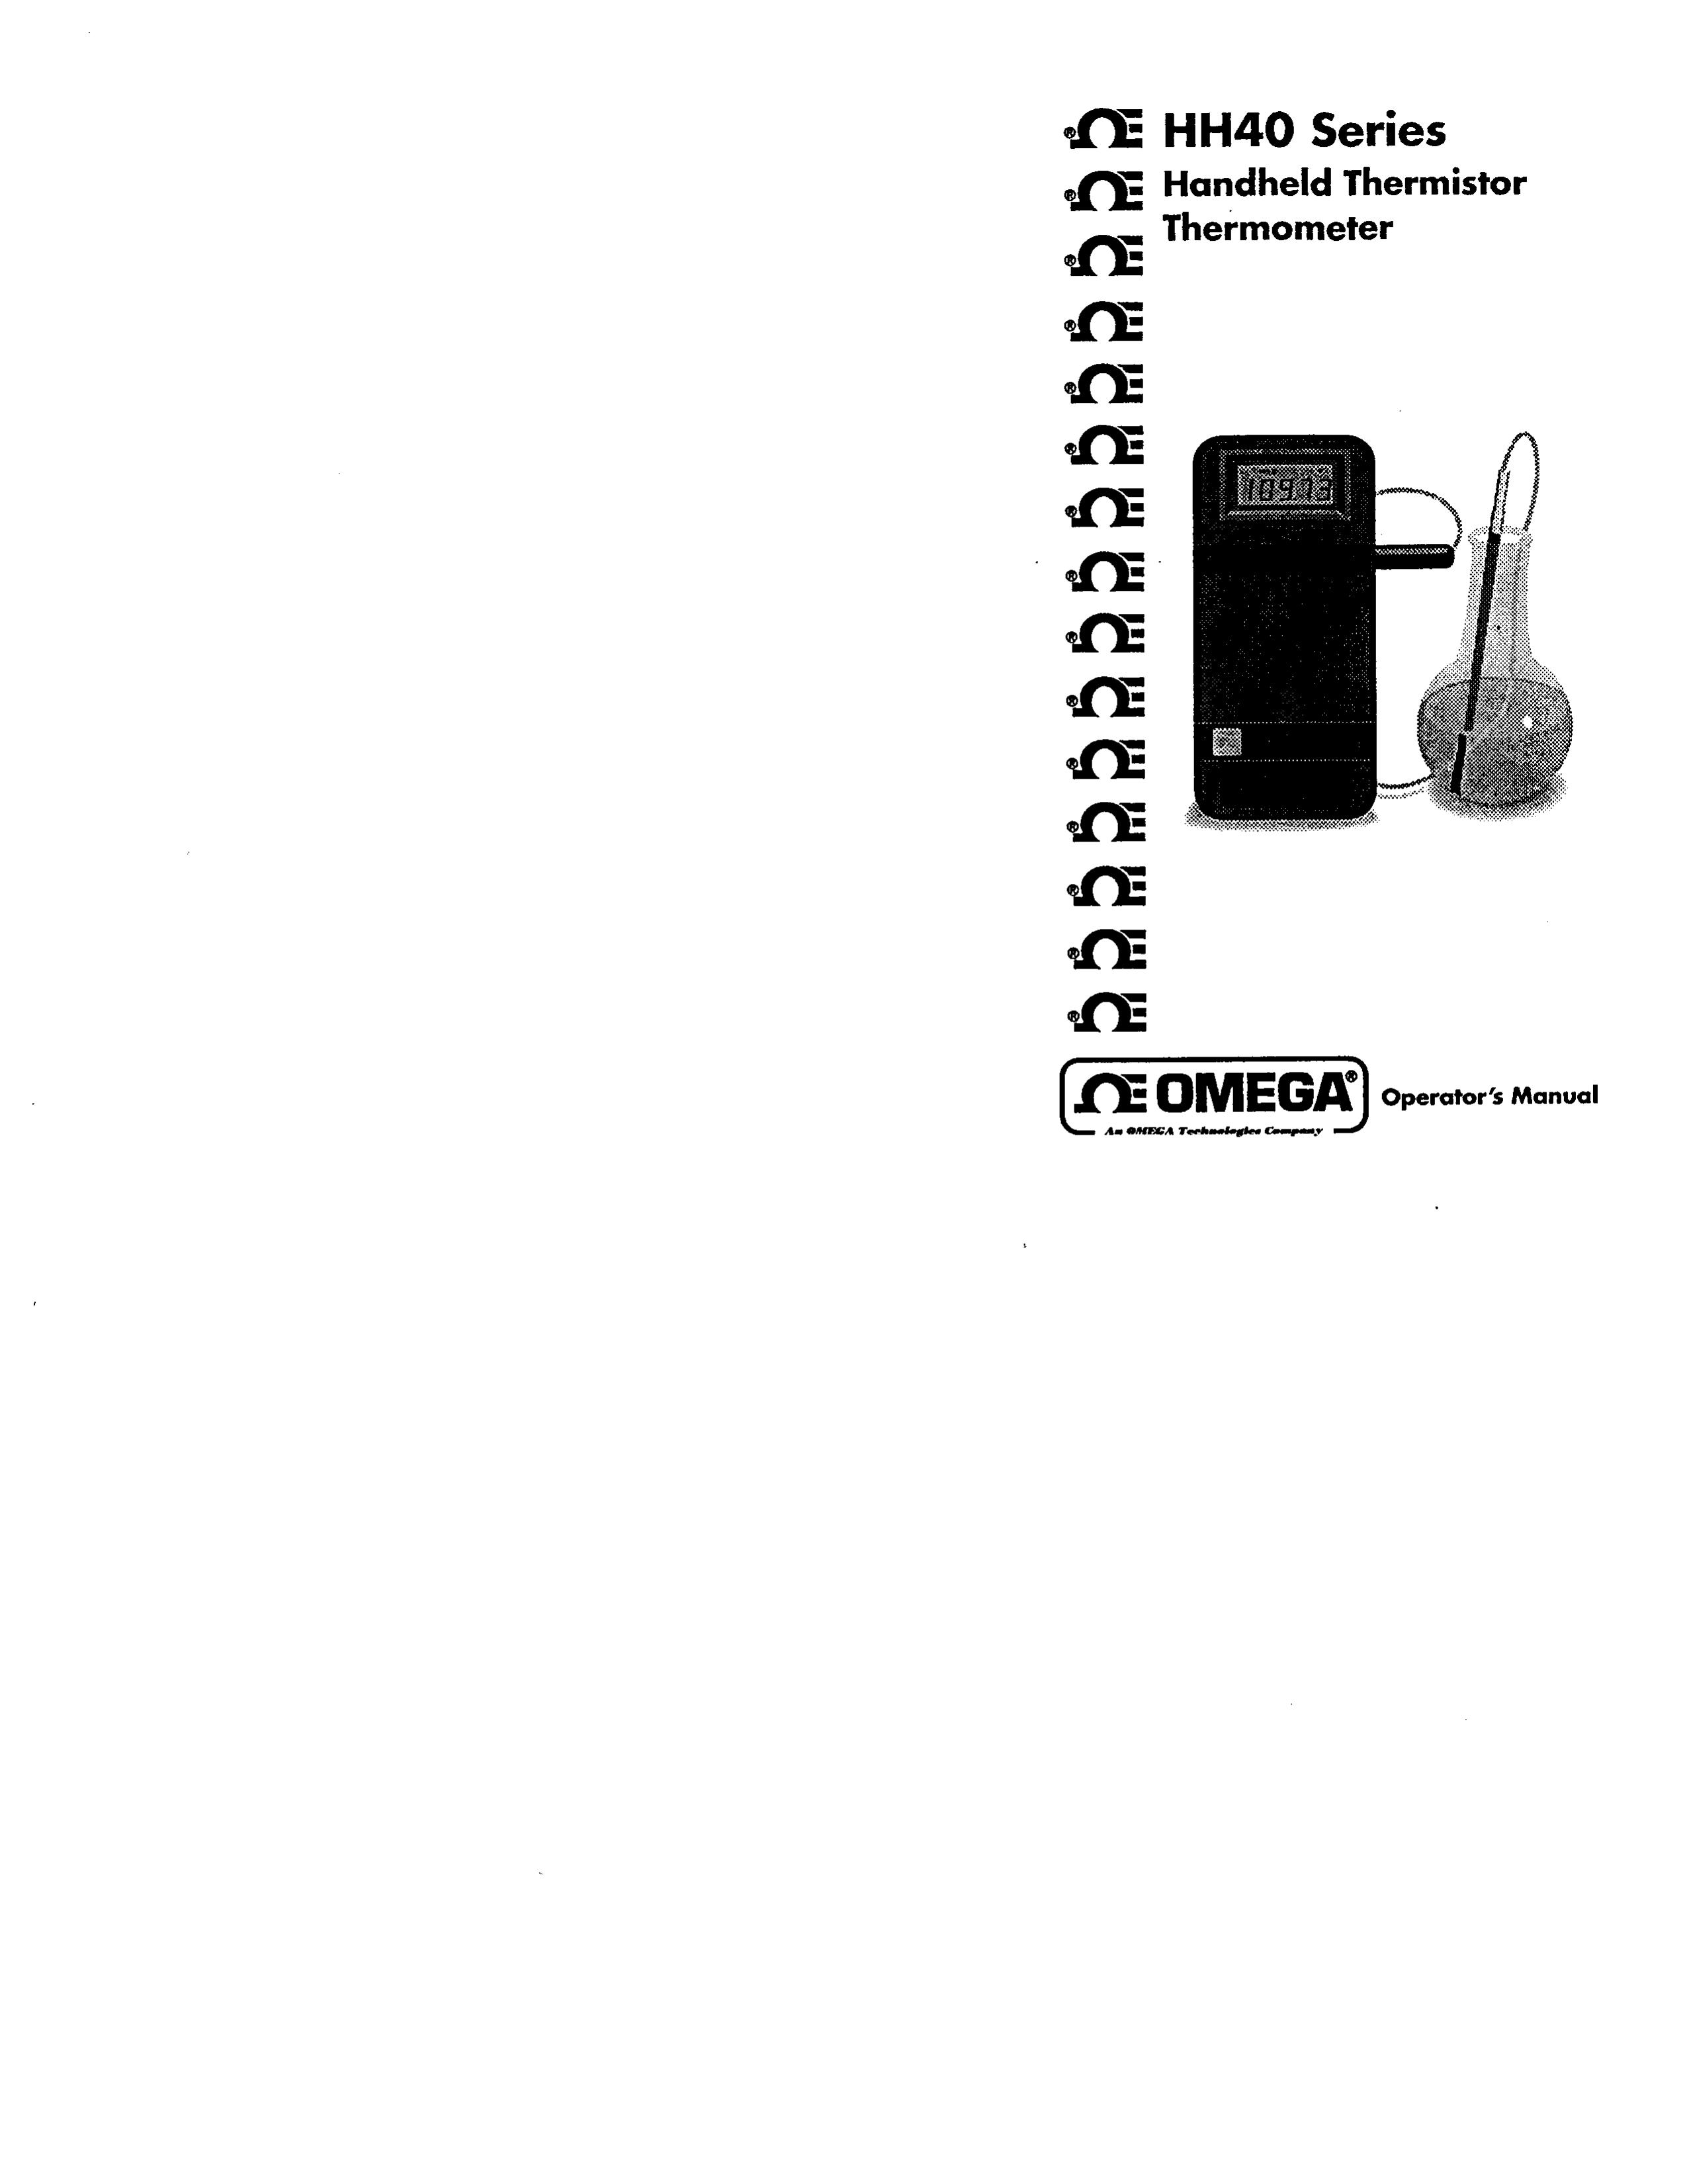 Omega HH40 Thermometer User Manual